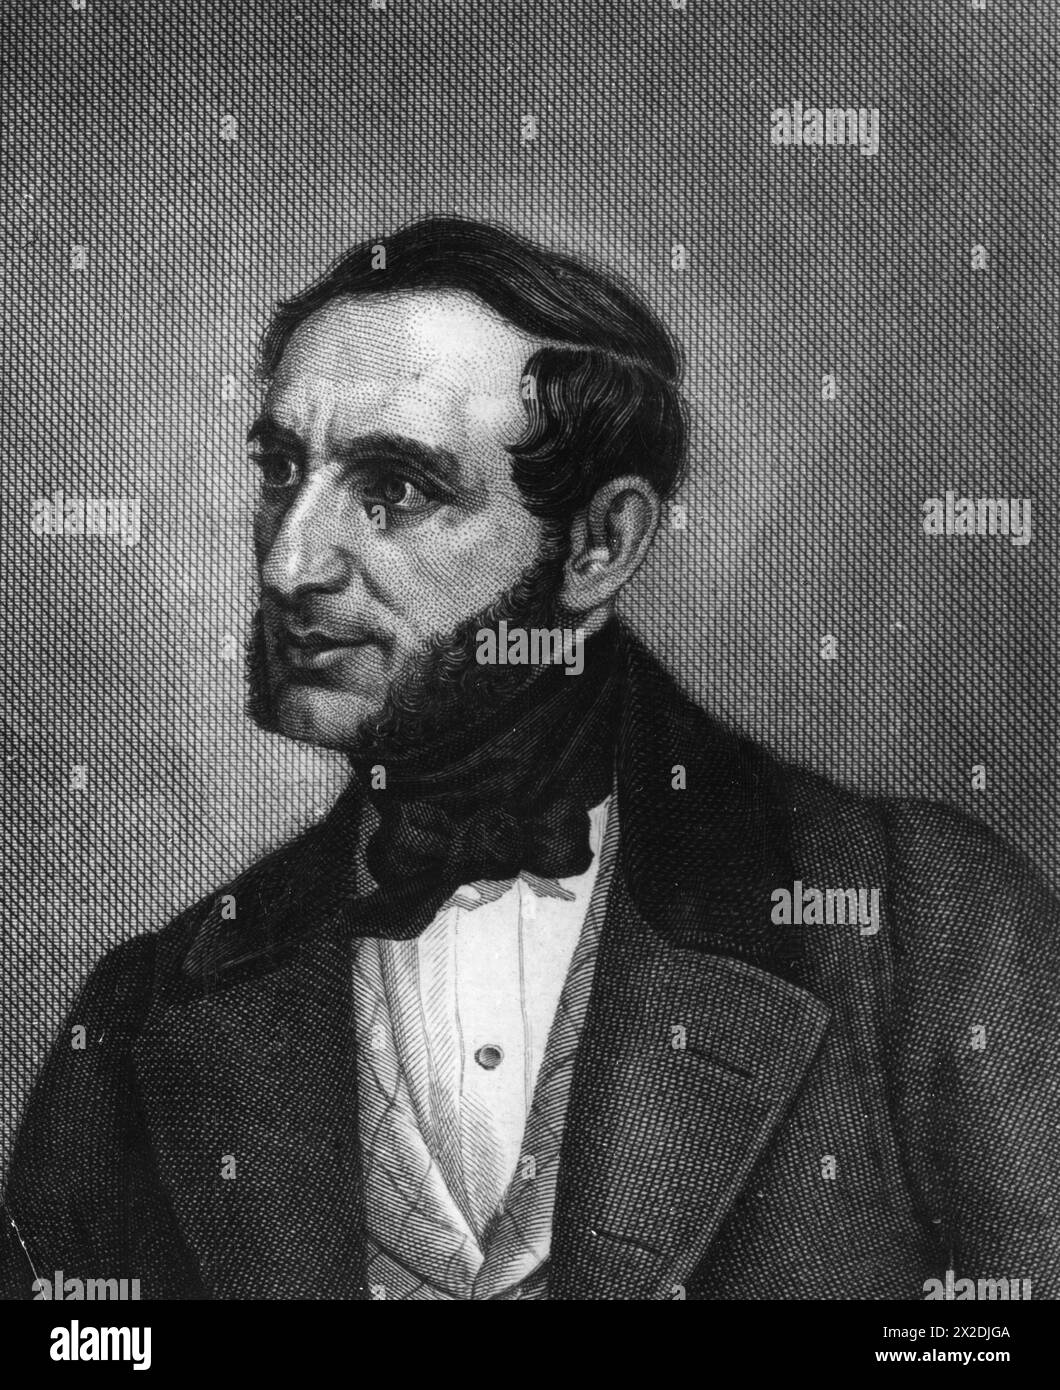 Schmerling, Anton Ritter von, 23.8.1805 - 23.5.1893, Austrian politician, ADDITIONAL-RIGHTS-CLEARANCE-INFO-NOT-AVAILABLE Stock Photo